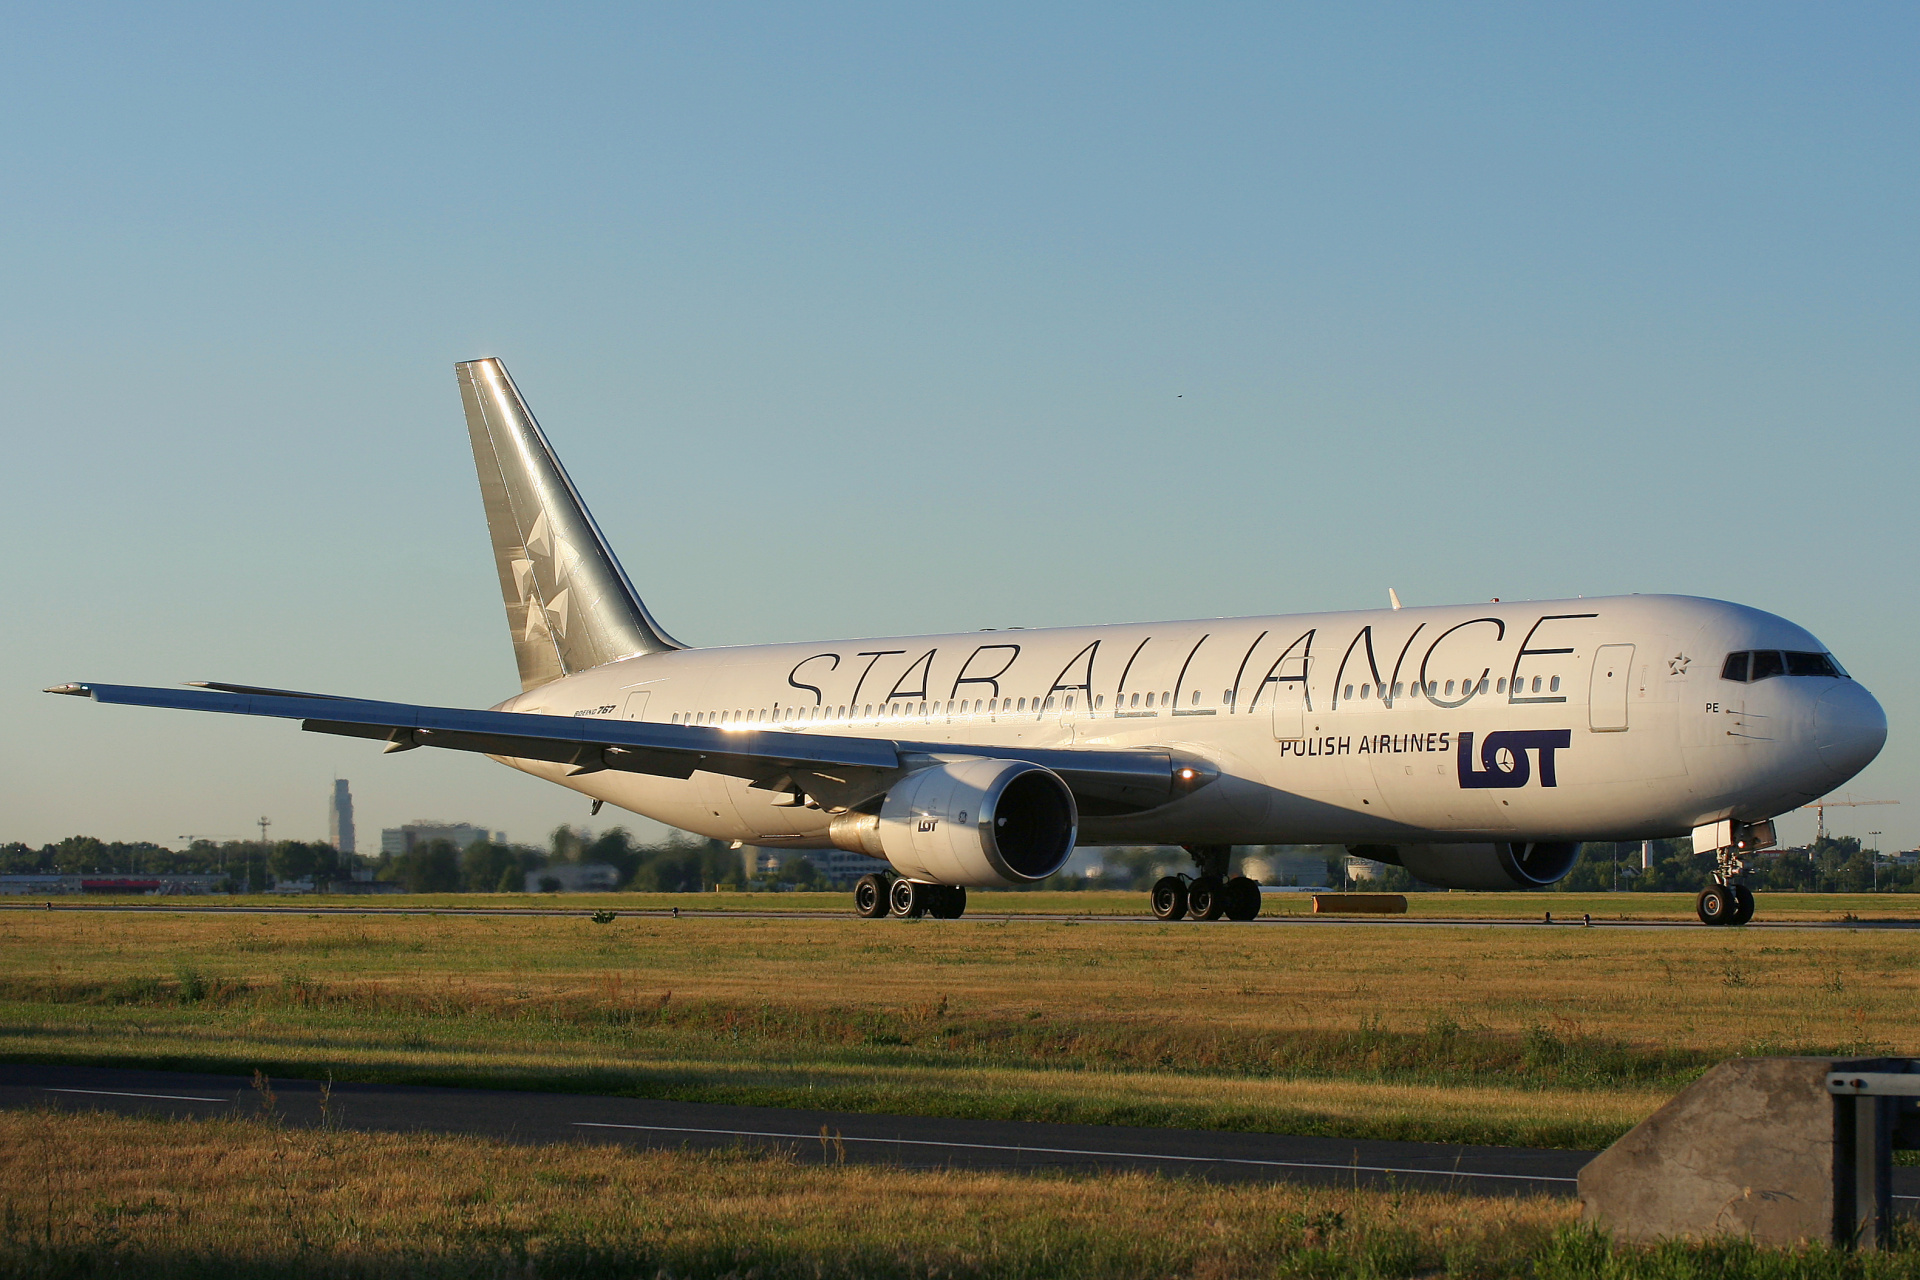 SP-LPE (Star Alliance livery) (Aircraft » EPWA Spotting » Boeing 767-300 » LOT Polish Airlines)